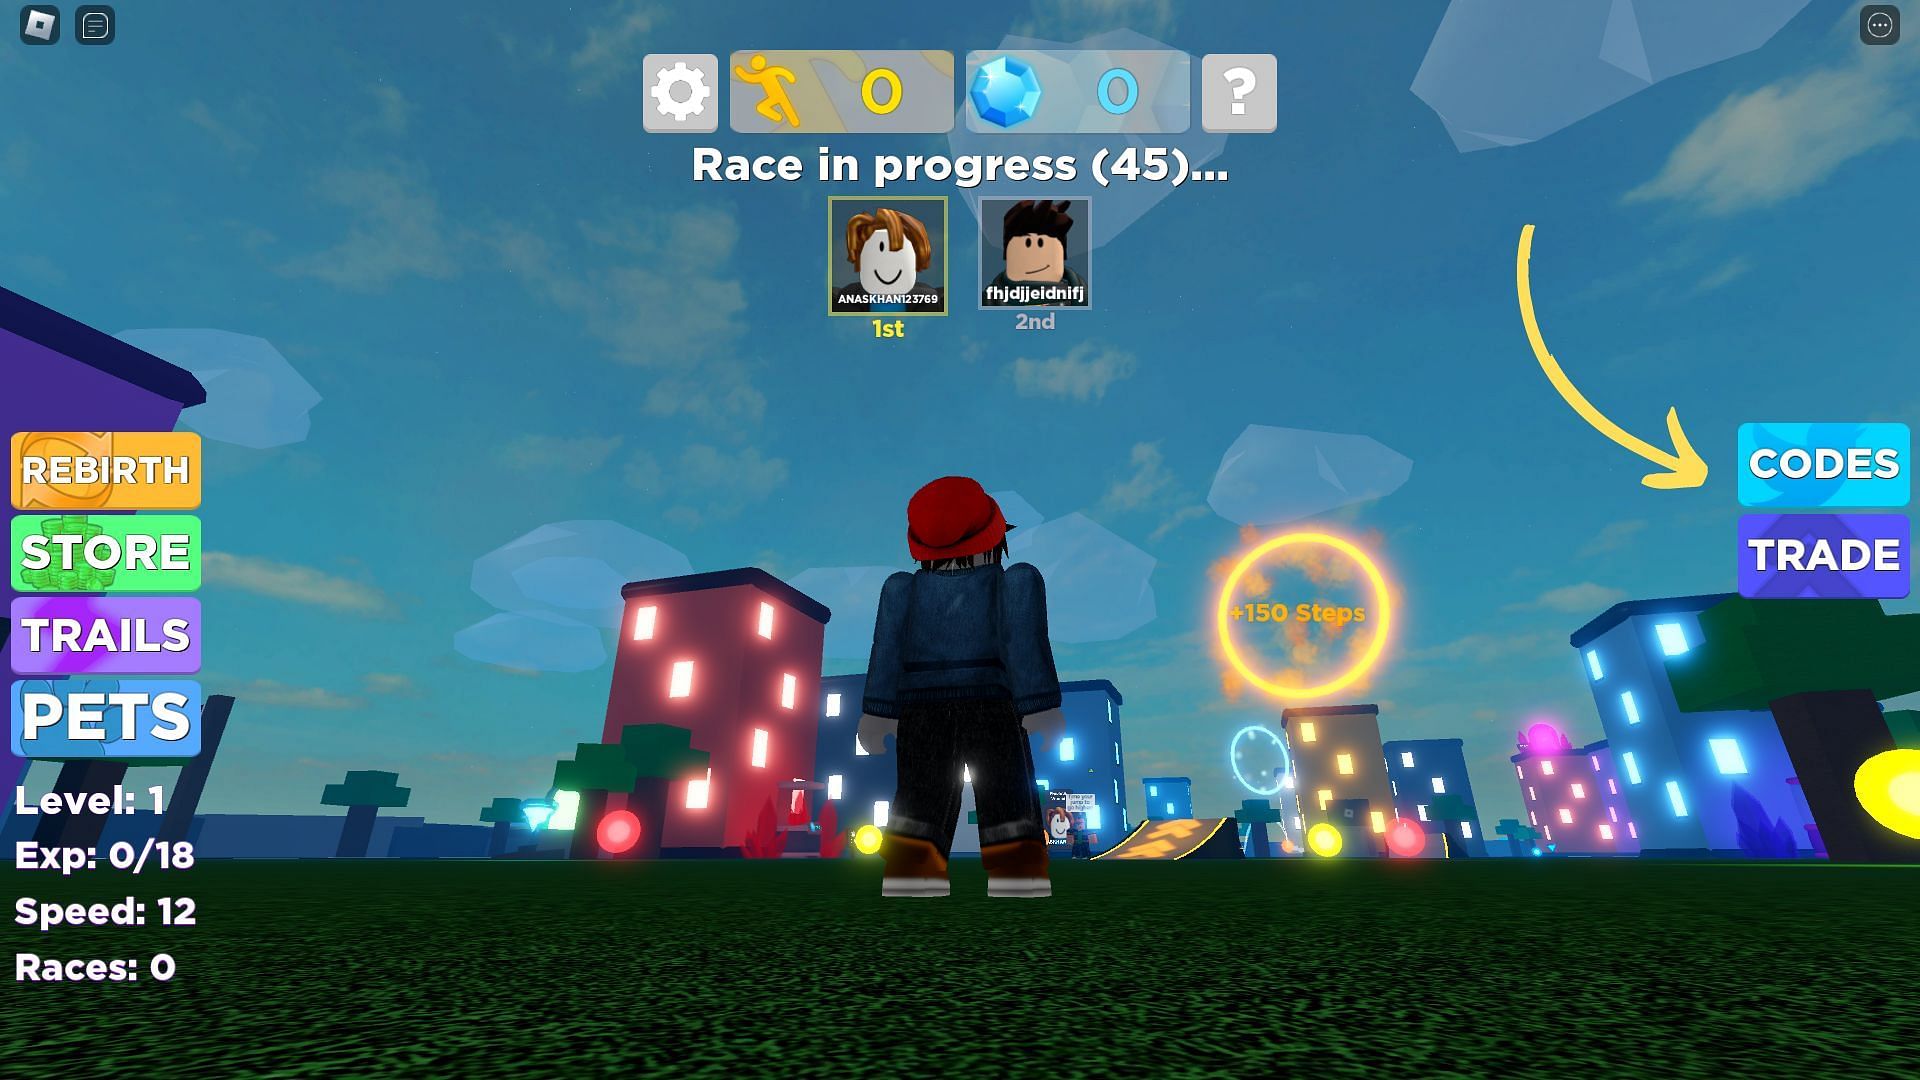 Codes icon in Legends of Speed (Image via Roblox and Sportskeeda)